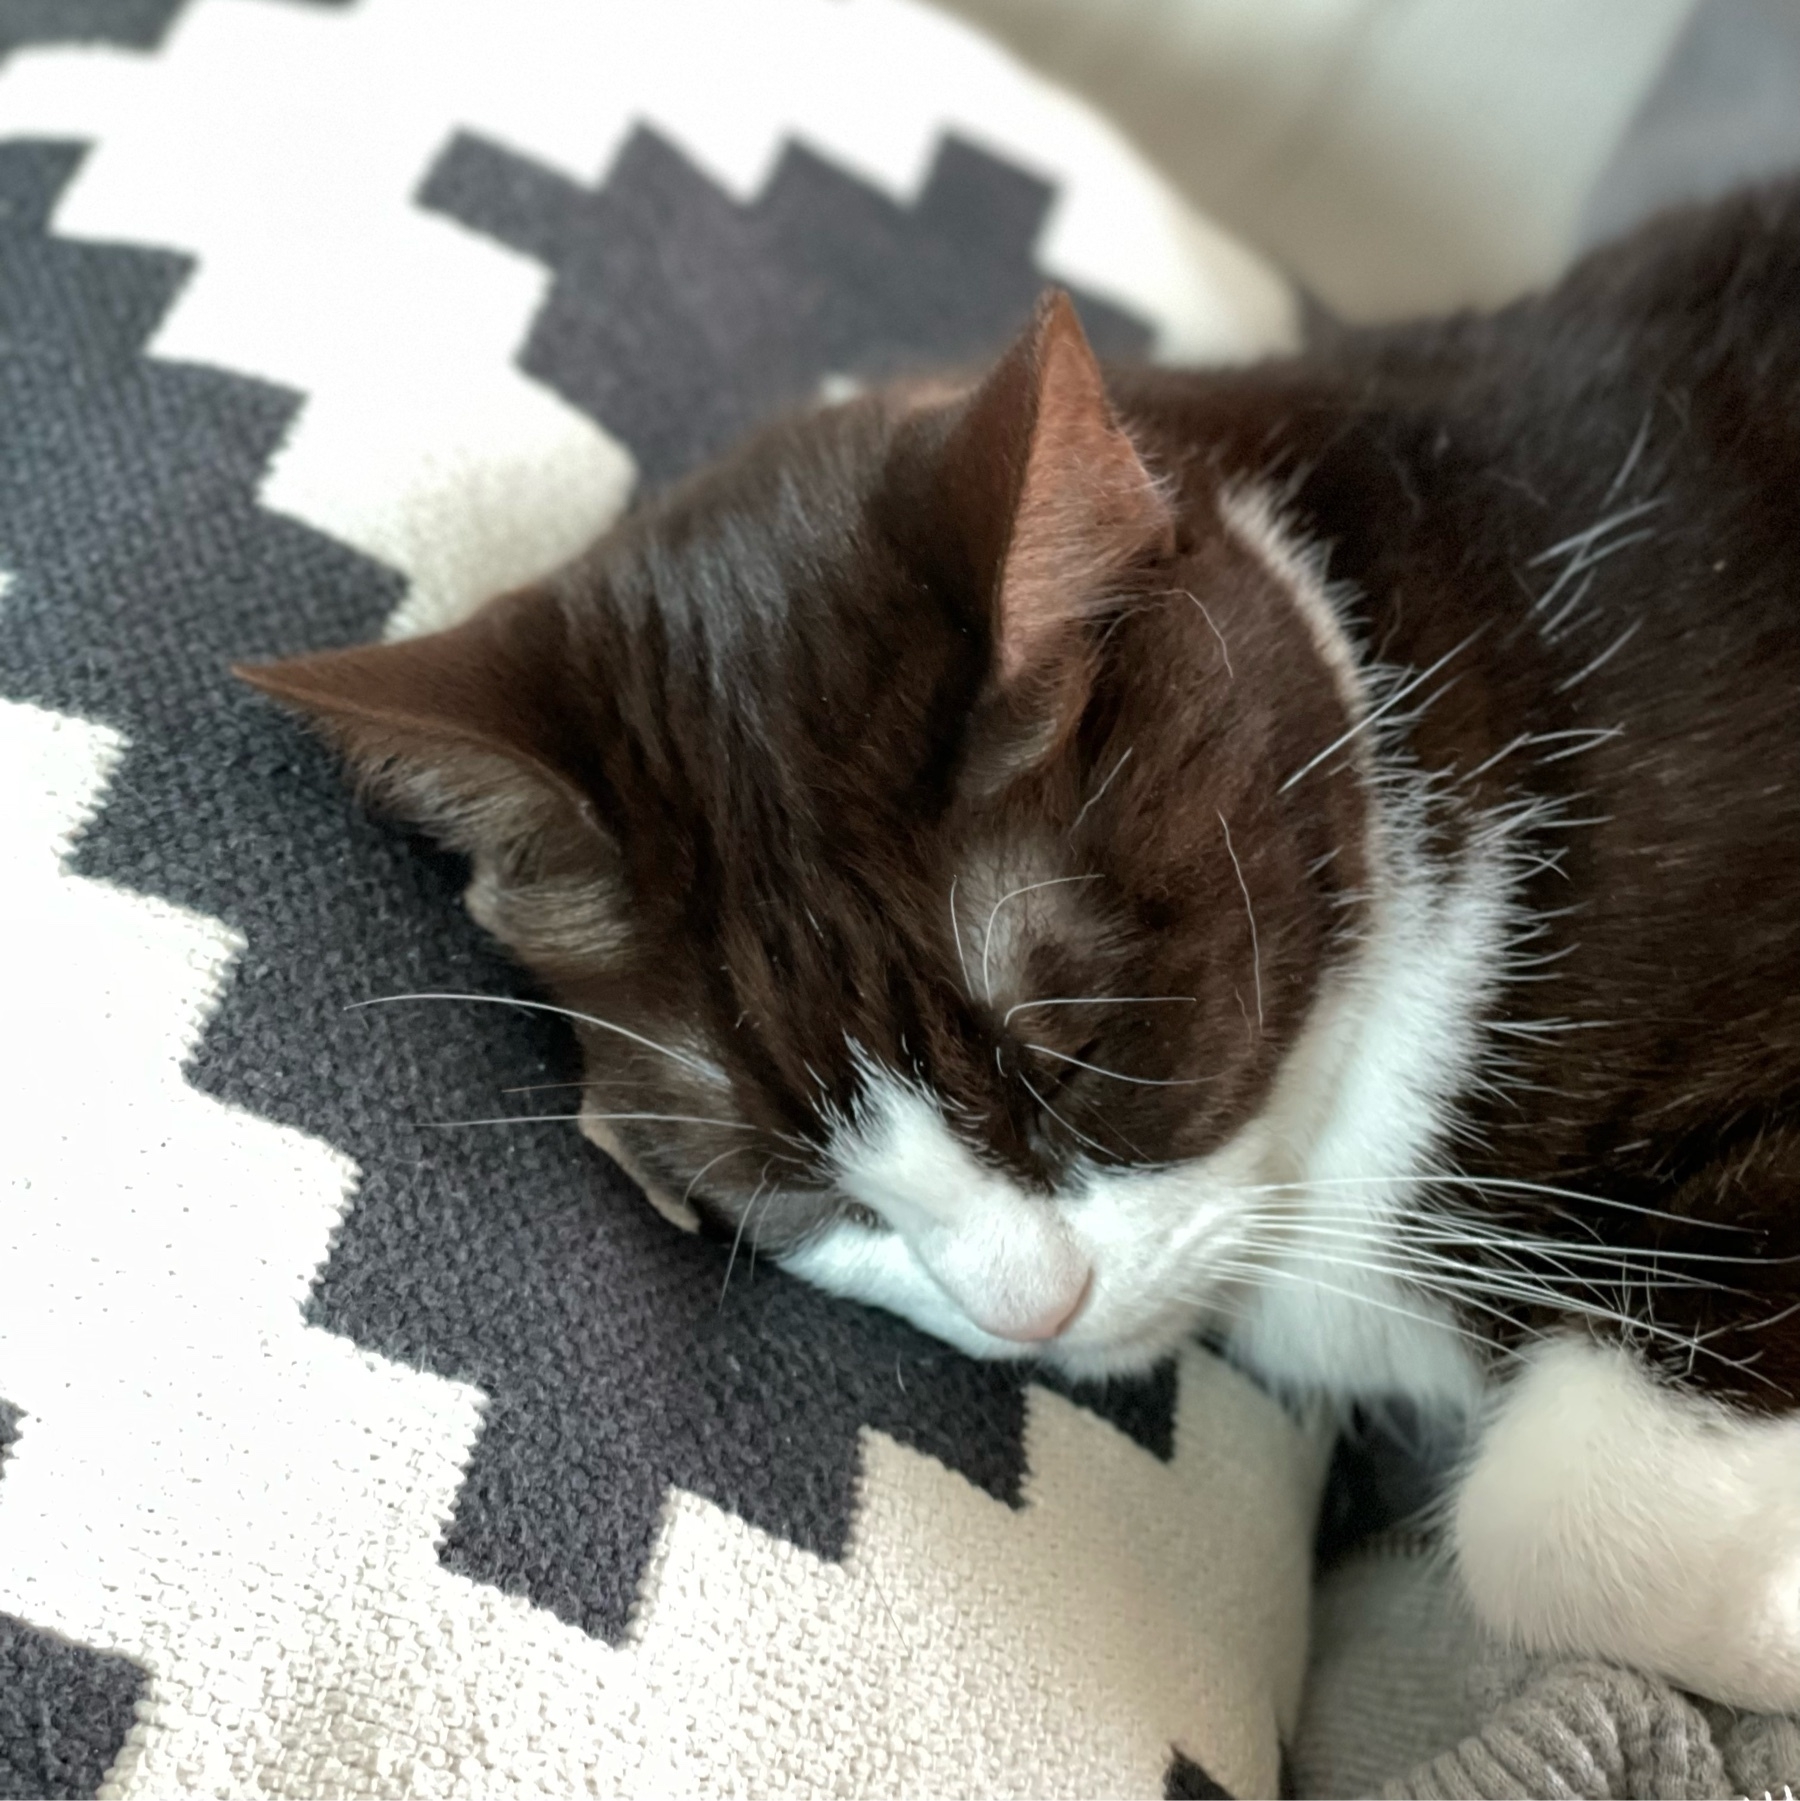 A close up of the head of a black and white cat resting on a black and white chequered pillow.